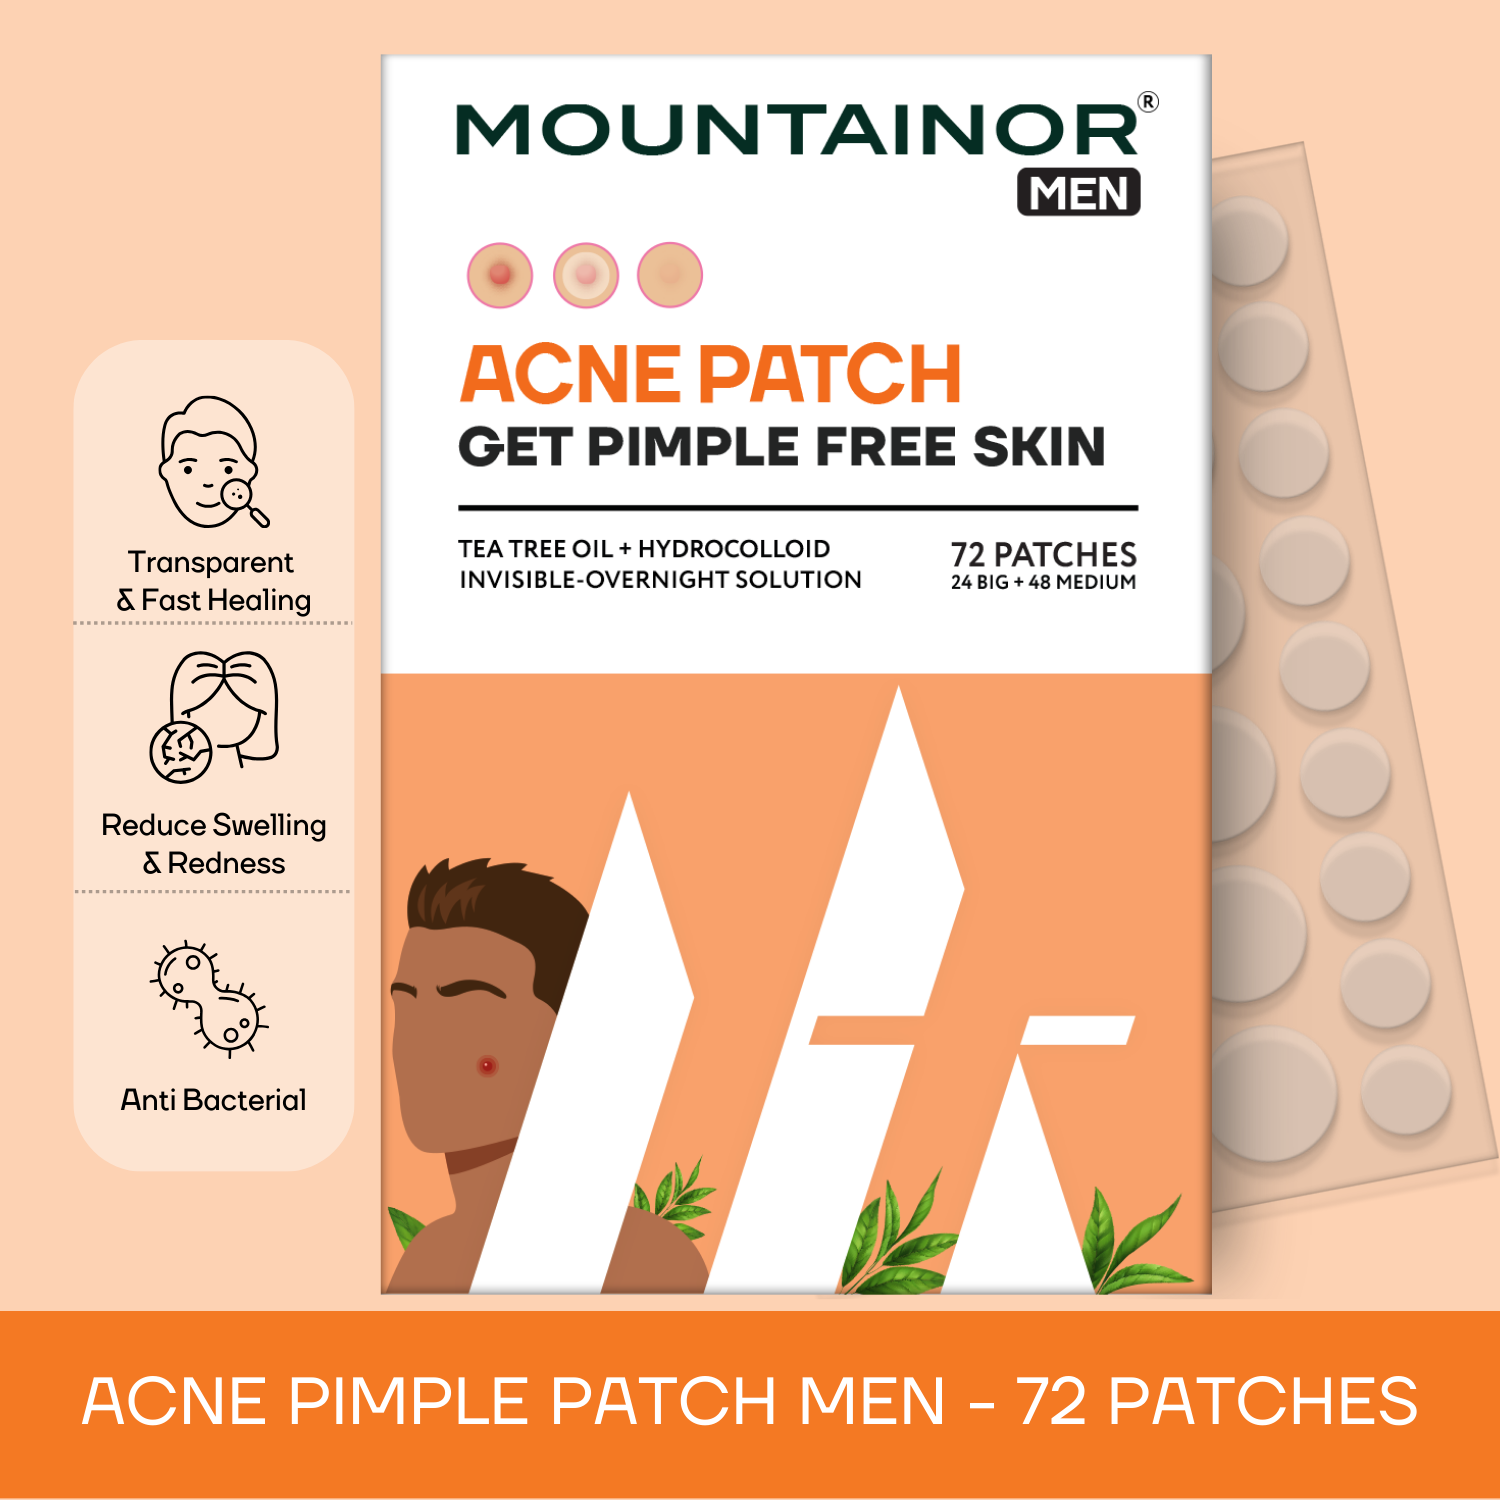 Acne Pimple Patch for Men 🧔🏻- 72 Hydrocolloid Patches for Clear, Blemish-Free Skin